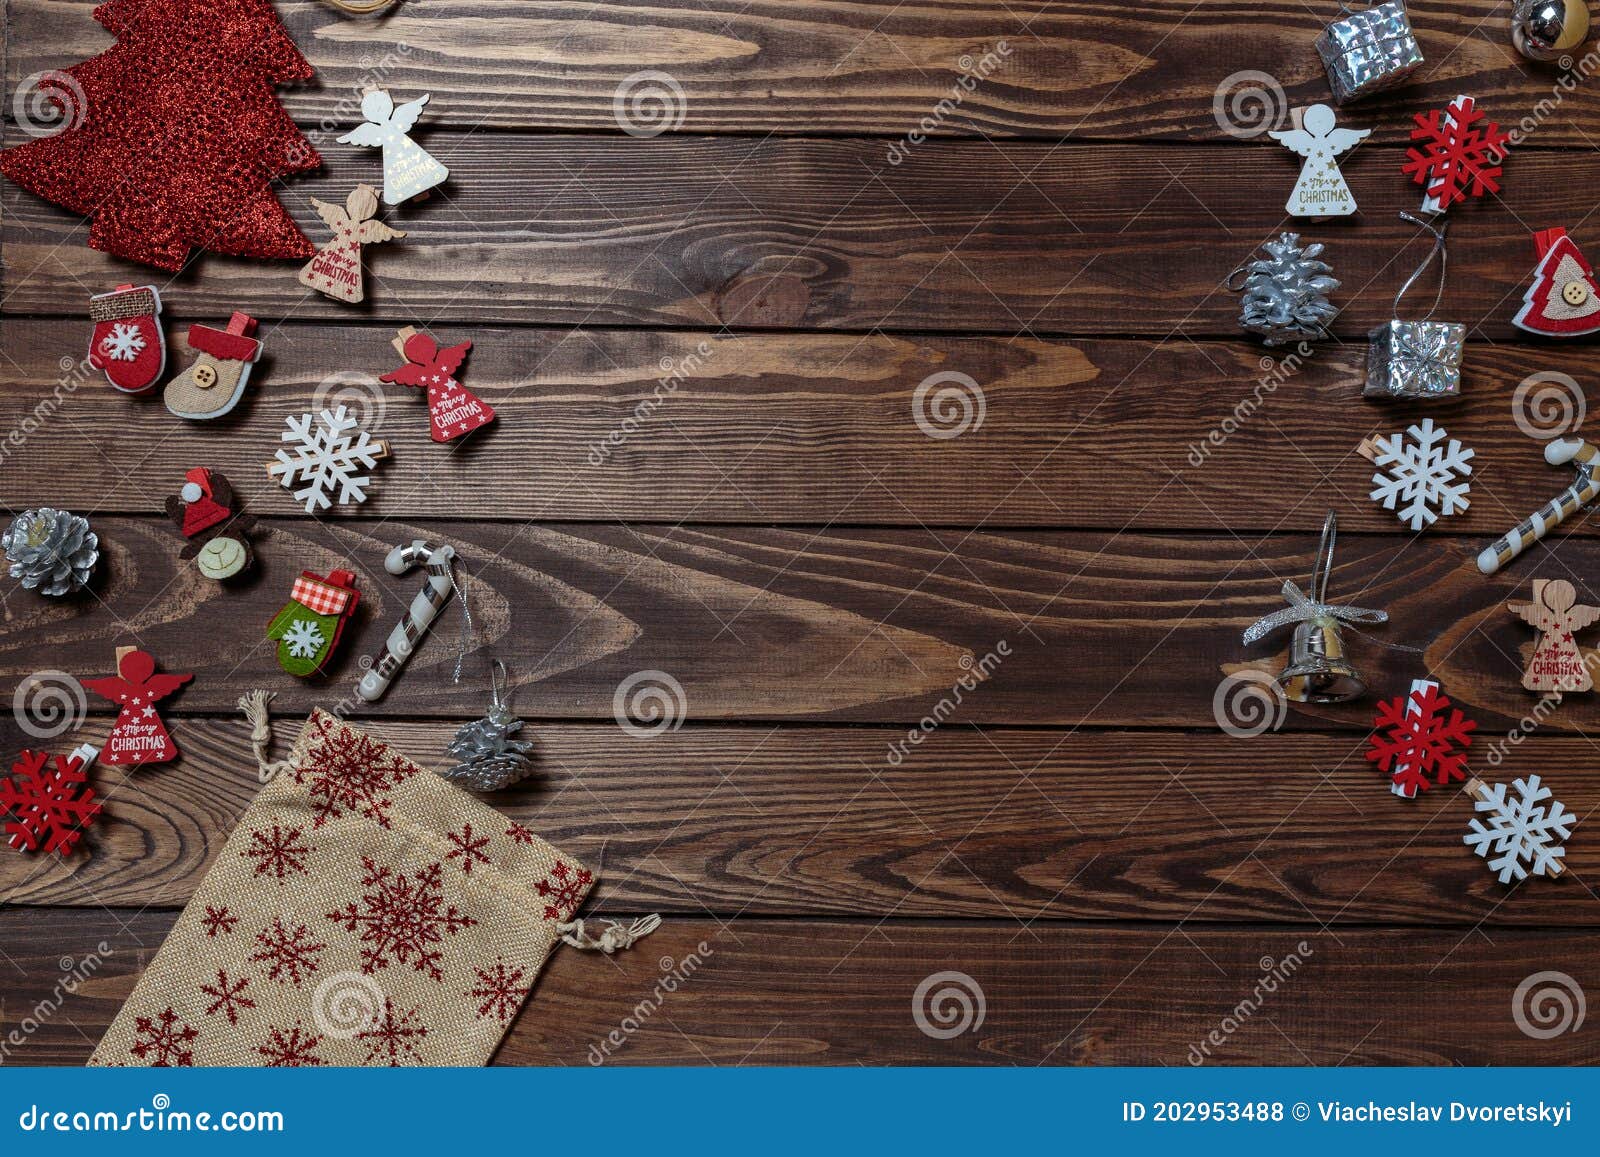 Merry Christmas. Wooden Background Decorated with Christmas Decorations ...